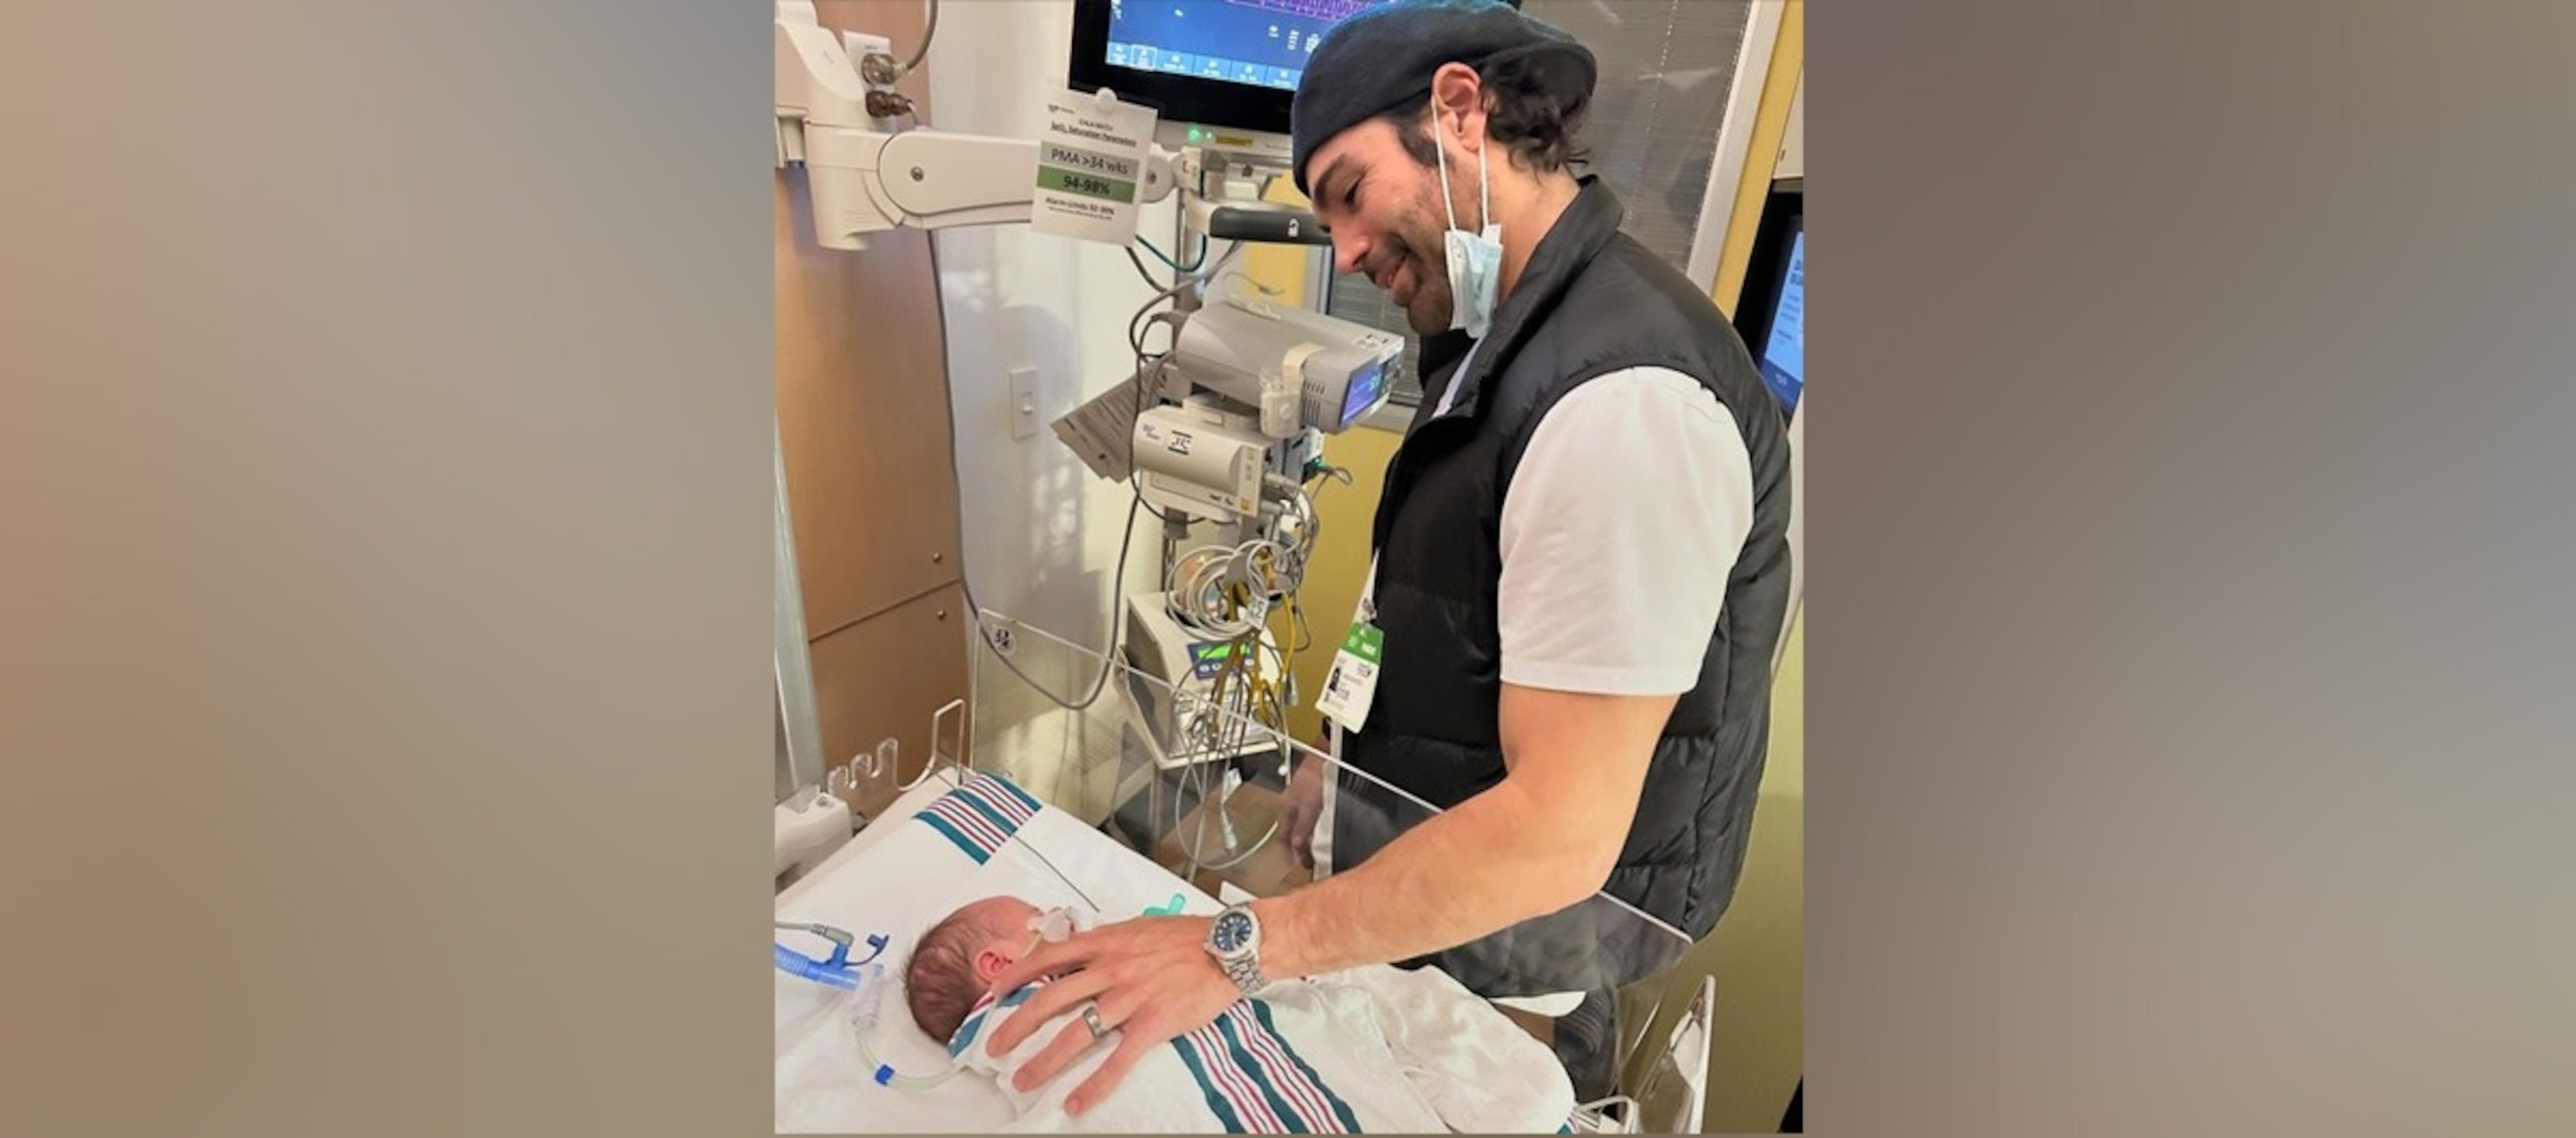 PHOTO: Jordi Vilasuso shared on Instagram that his newborn daughter Lucy was hospitalized due to RSV.